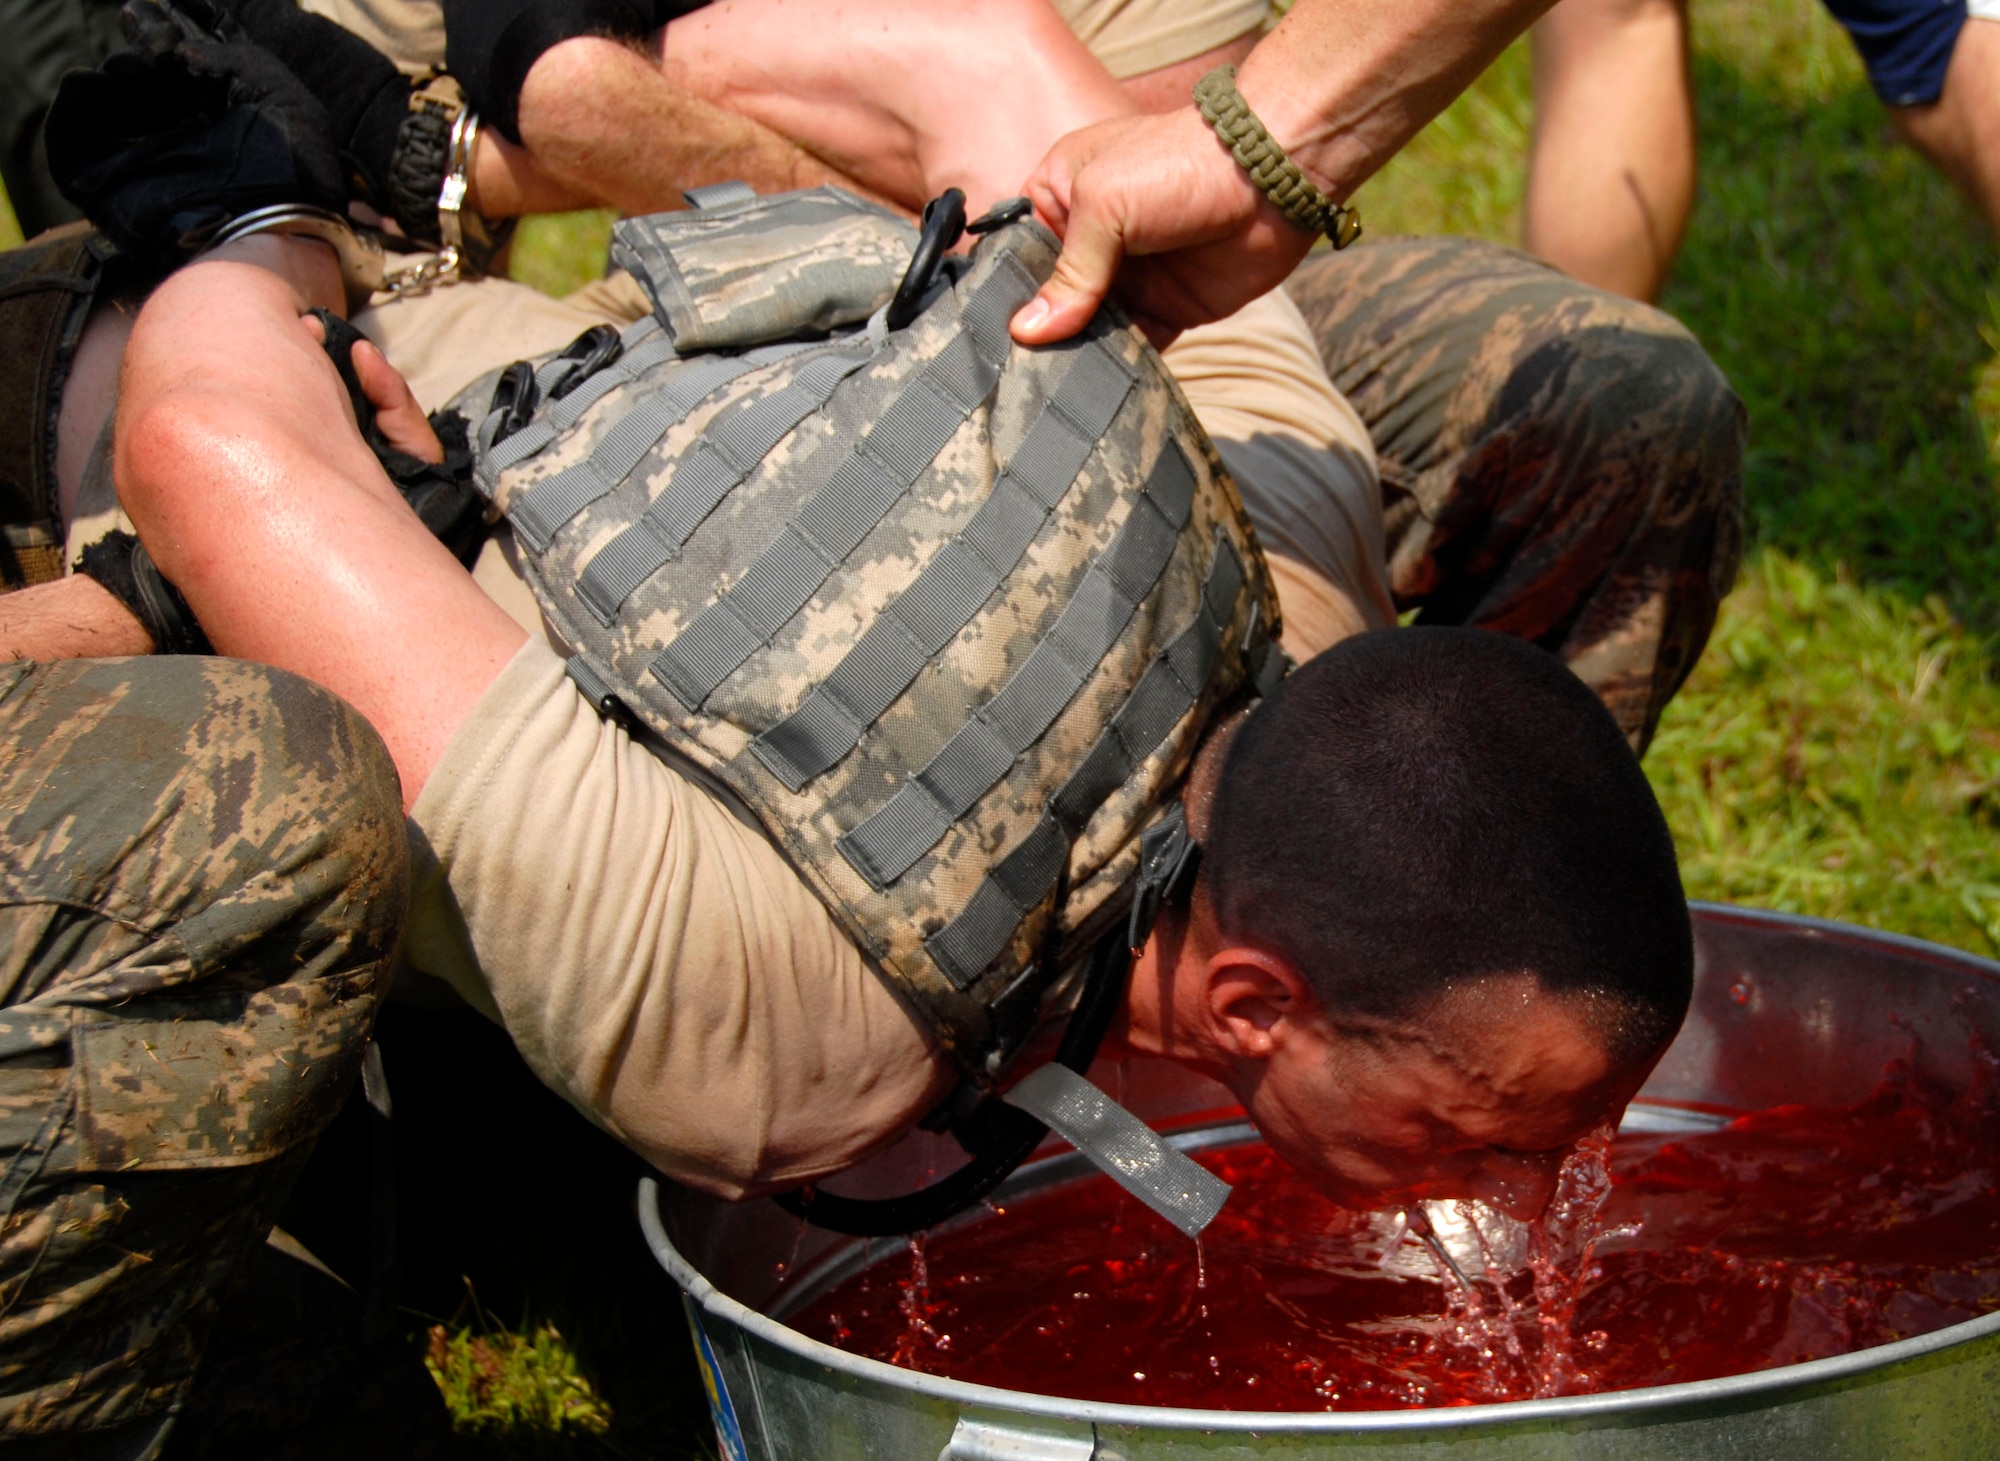 Staff Sgt. Christopher Sixt of the 103rd Security Forces Squadron is handcuffed as he attempts to retrieve a handcuff key with his mouth from a bucket of capsaicin, the ingredient used in police pepper spray. Sixt is participating in the PT portion of the Connecticut SWAT Challenge in West Harford, Conn., Aug. 23, 2012. (U.S. Air Force photo by Senior Airman Jennifer Pierce/Released)